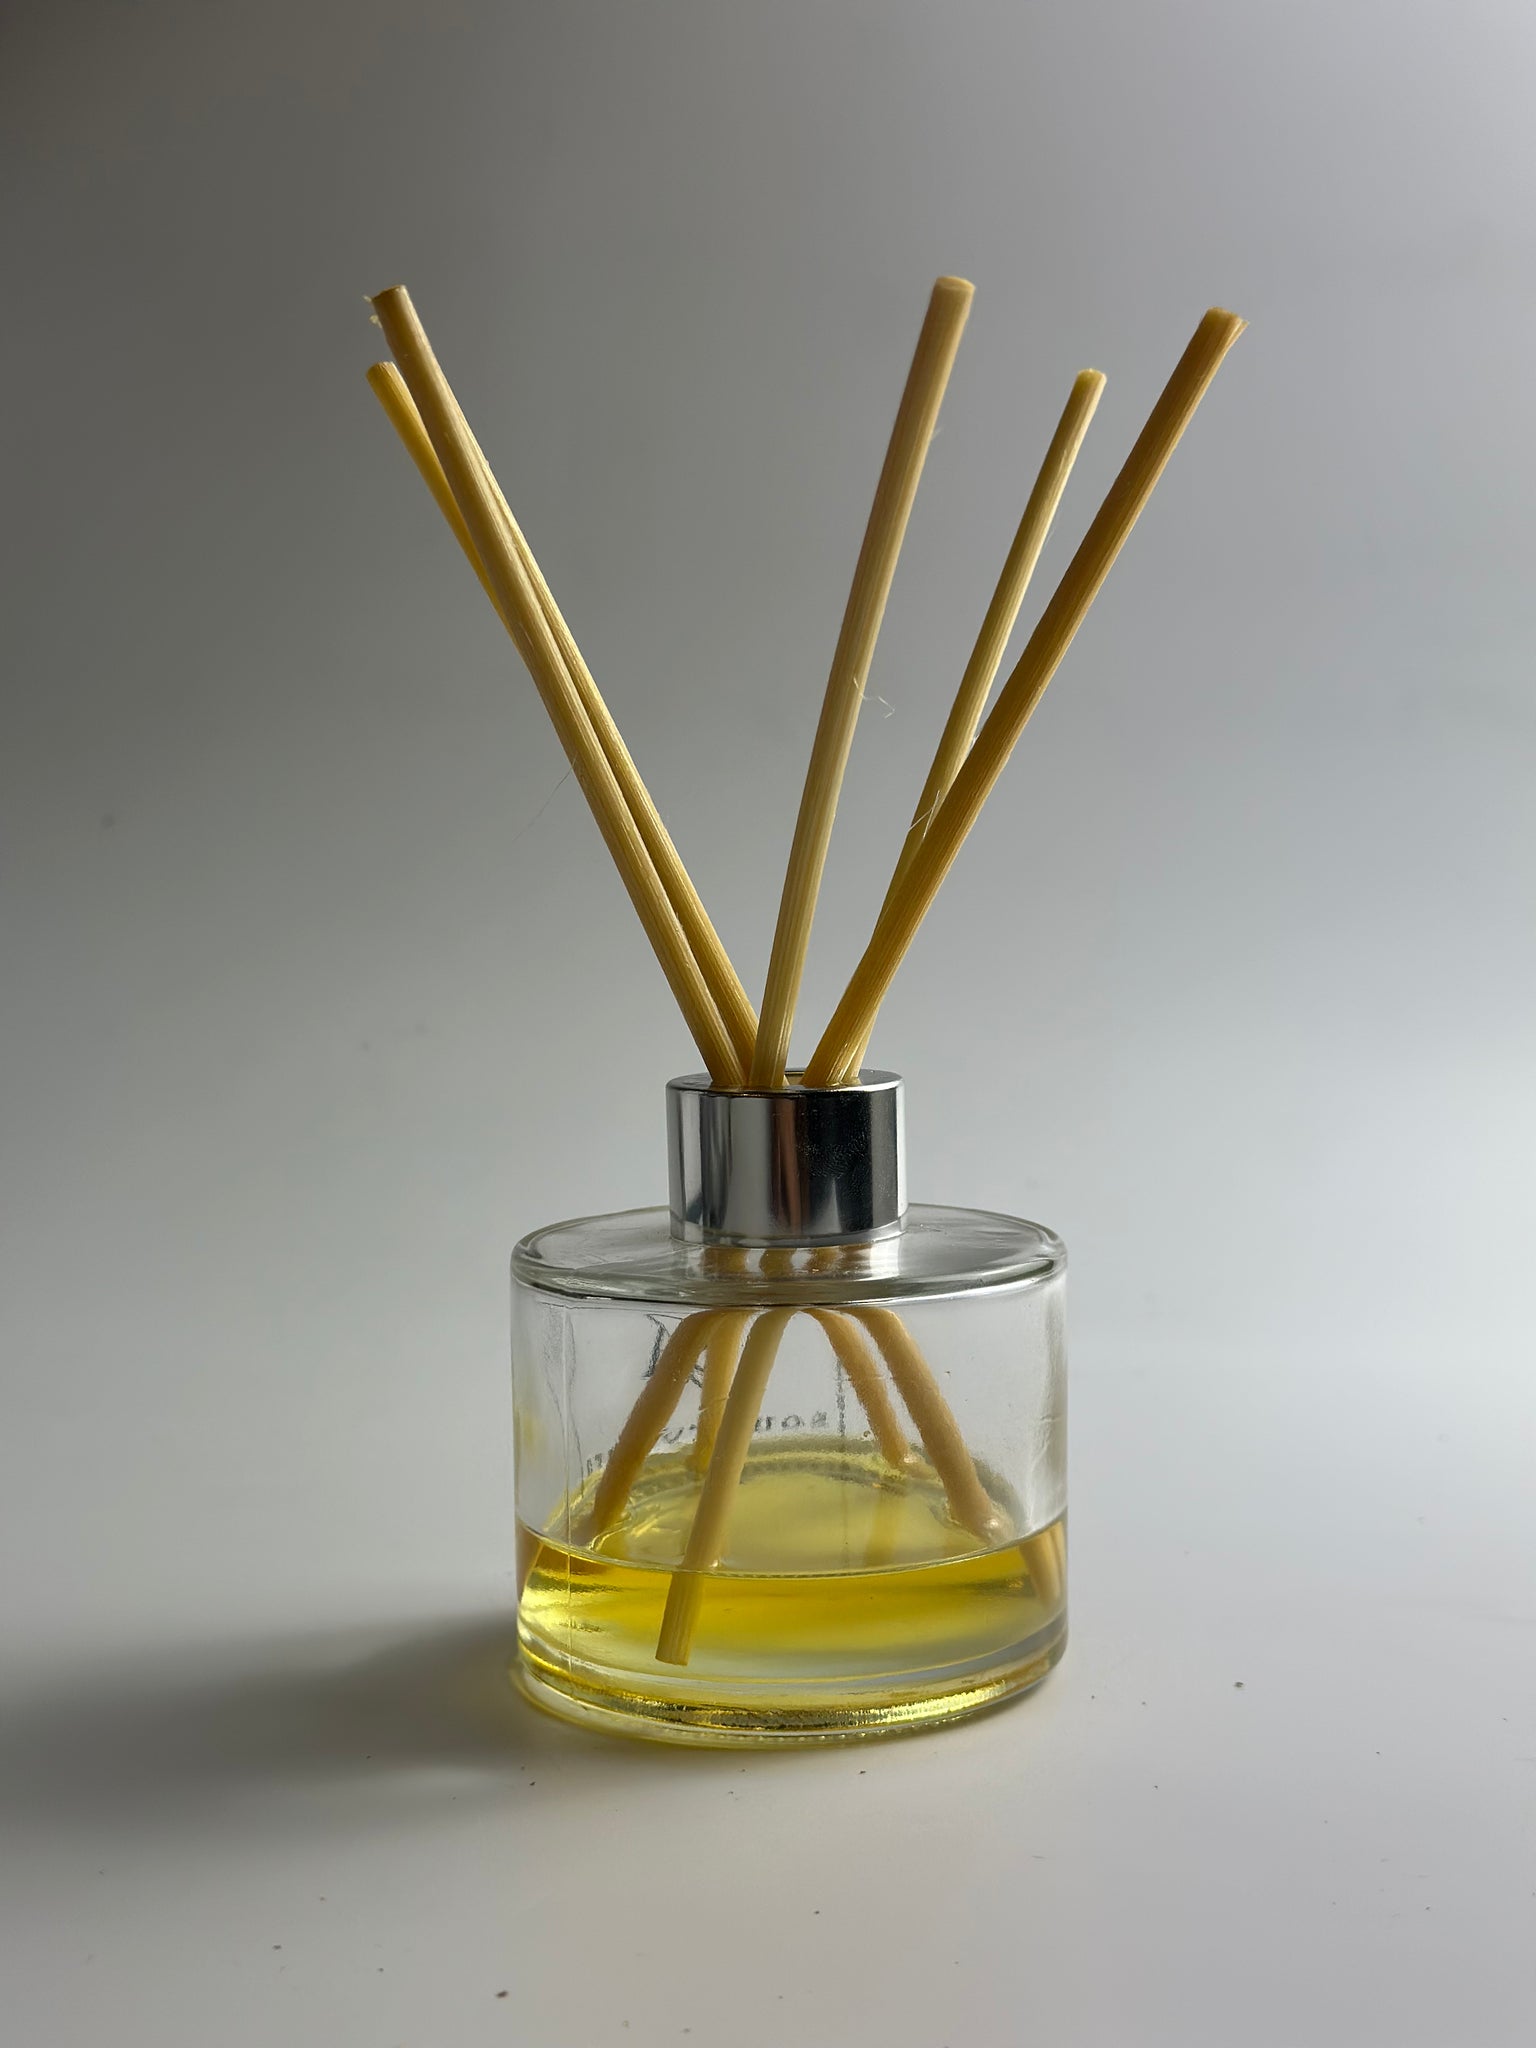 Reed Diffuser | Moroccan Amber - FINAL SALE - Loft81 Home